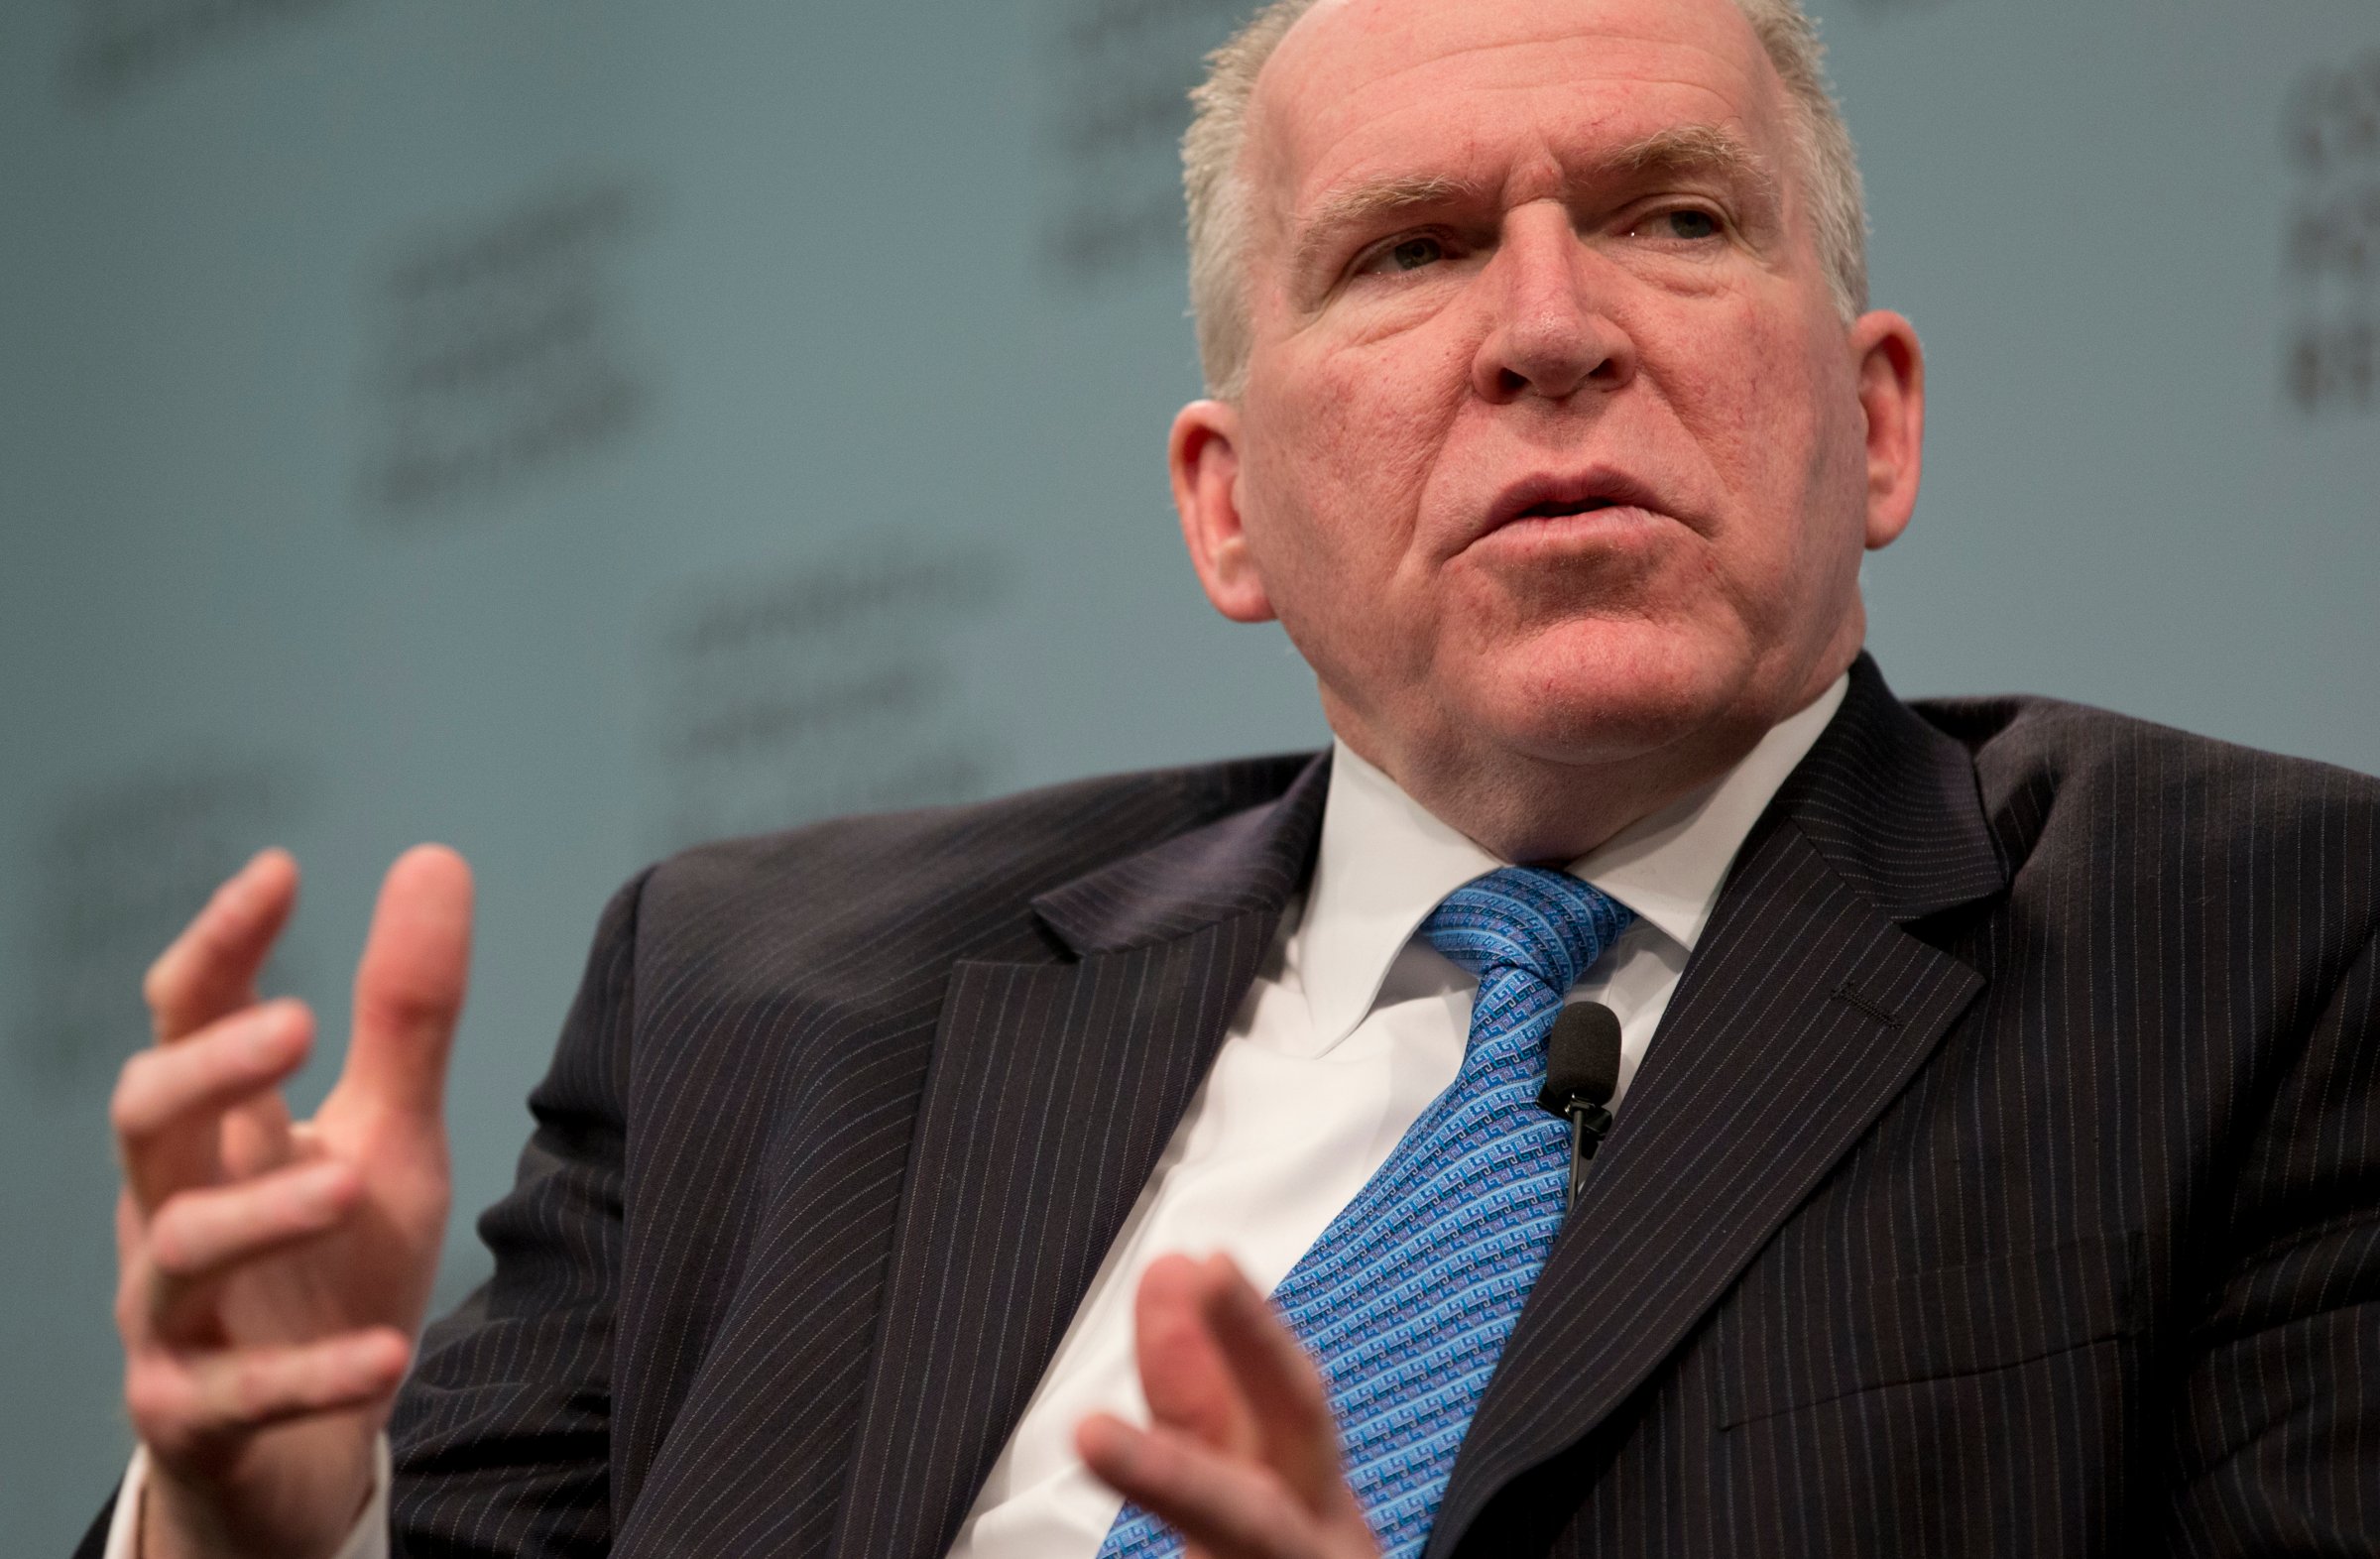 CIA Director John Brennan speaks at the Council on Foreign Relations in Washington on March 11, 2014.